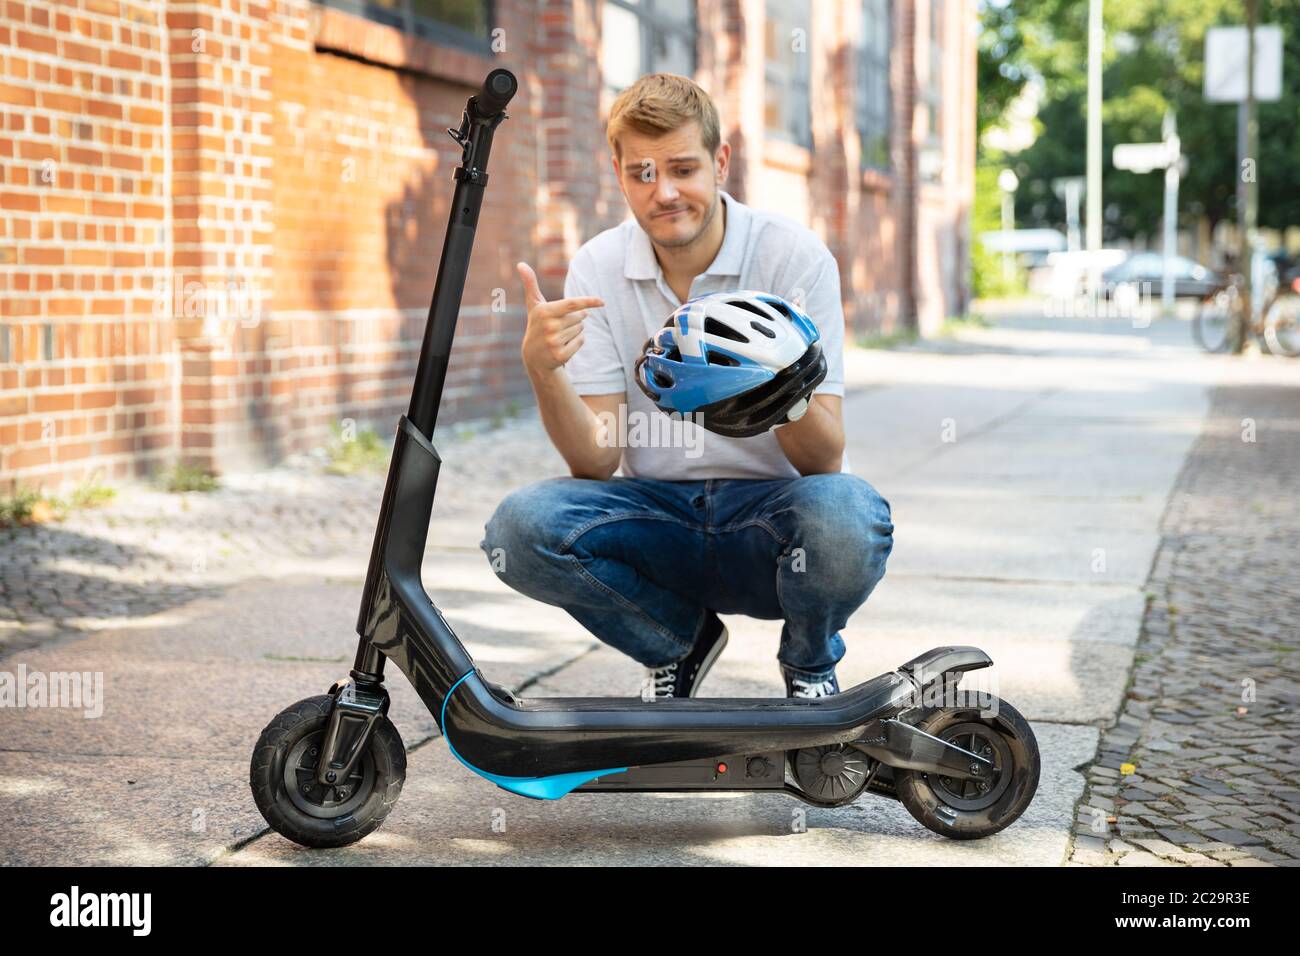 Man Complaining About Having To Wear Helmet For E-Scooter Stock Photo